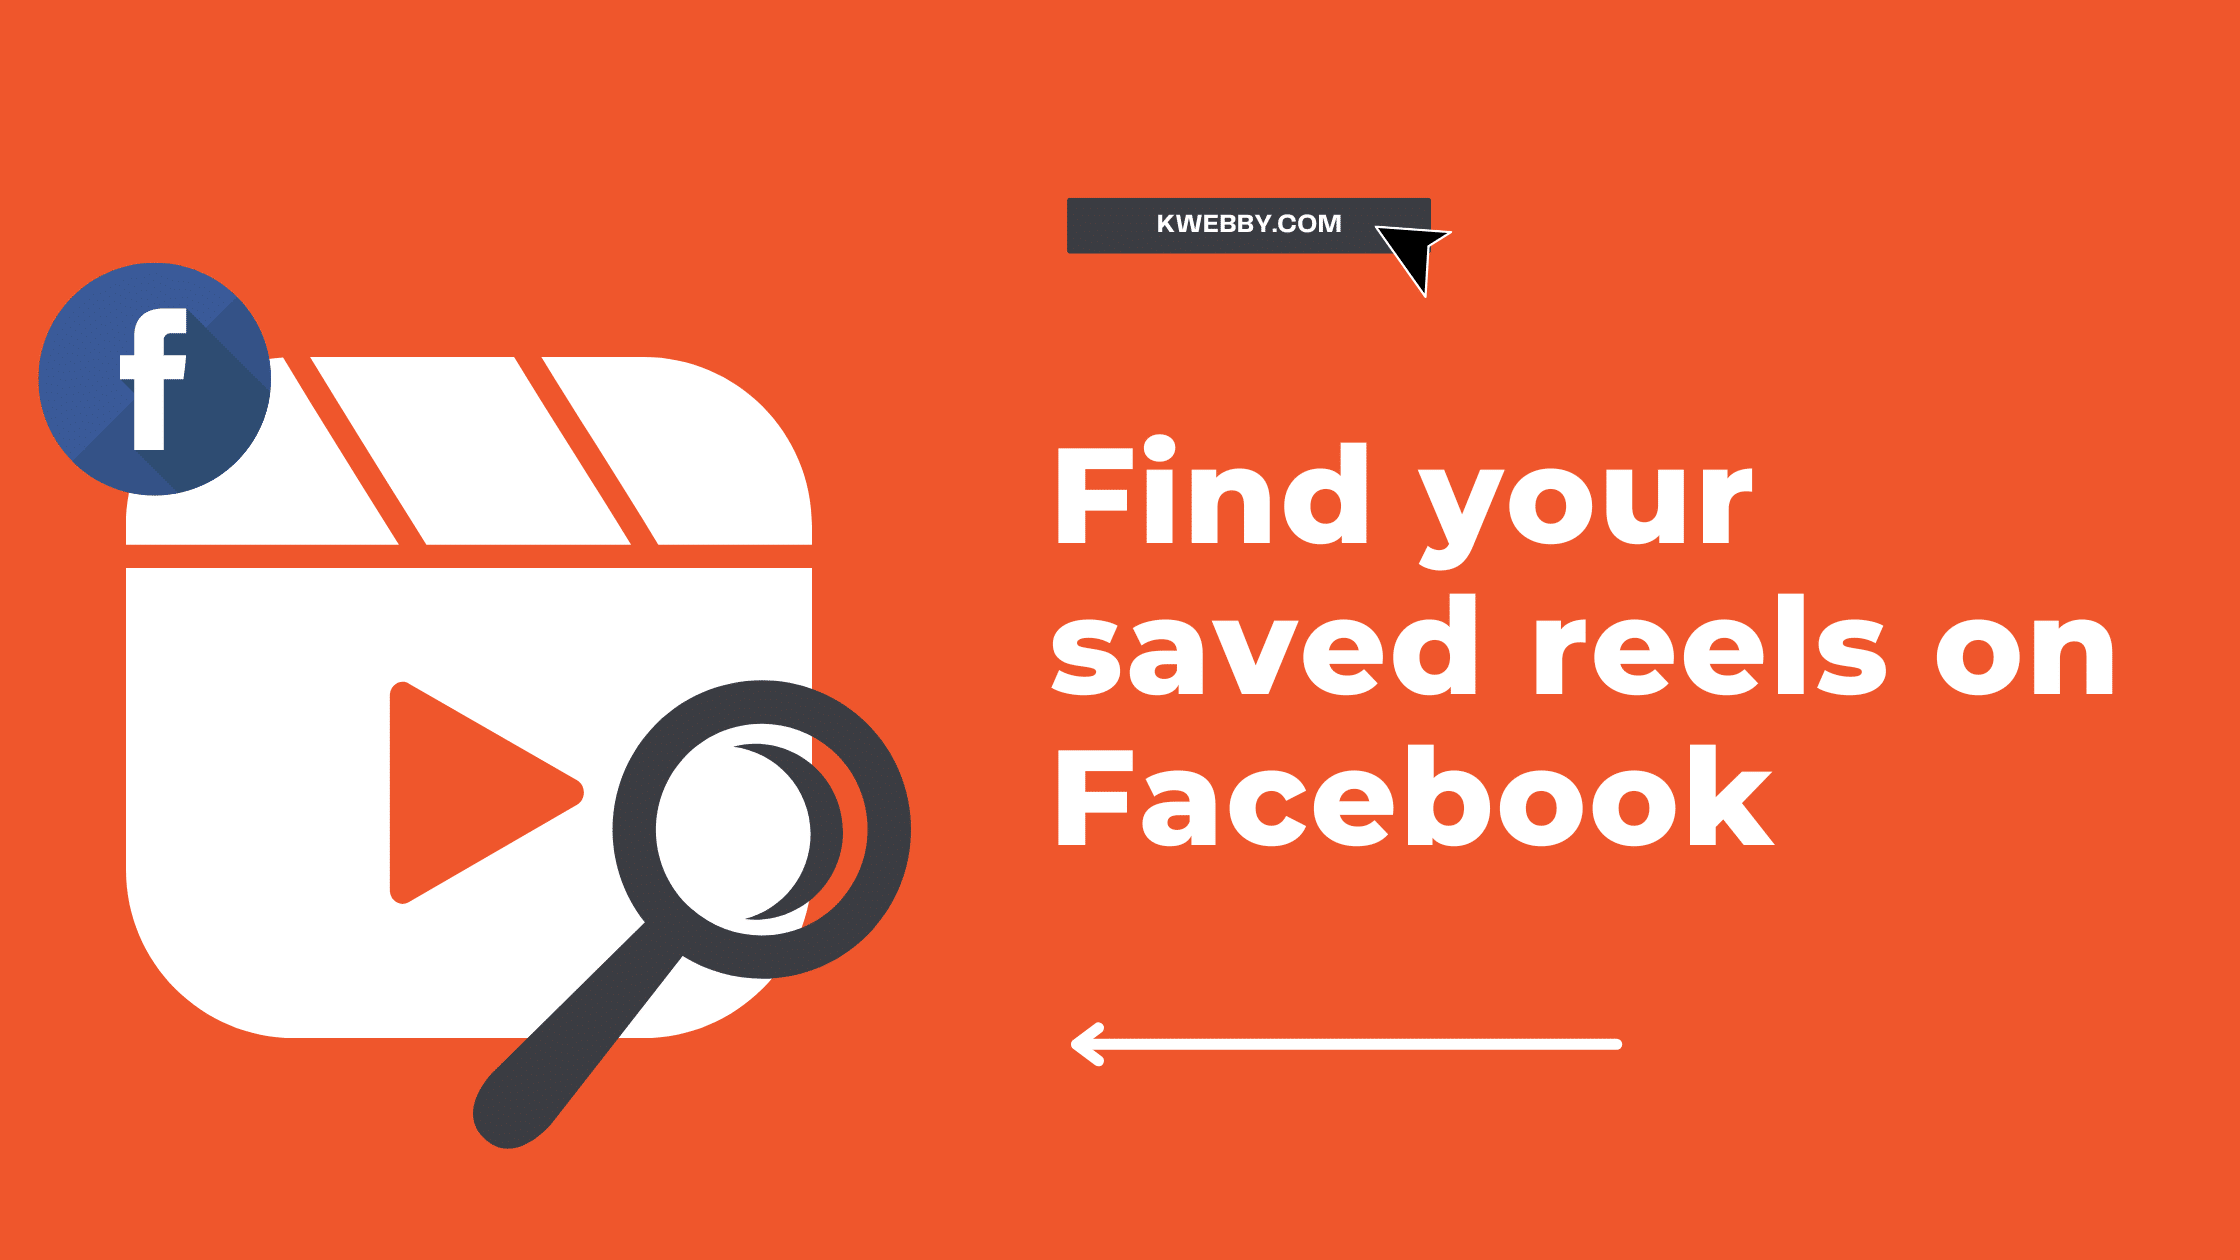 How to find your saved reels on Facebook (2 Easy Ways)